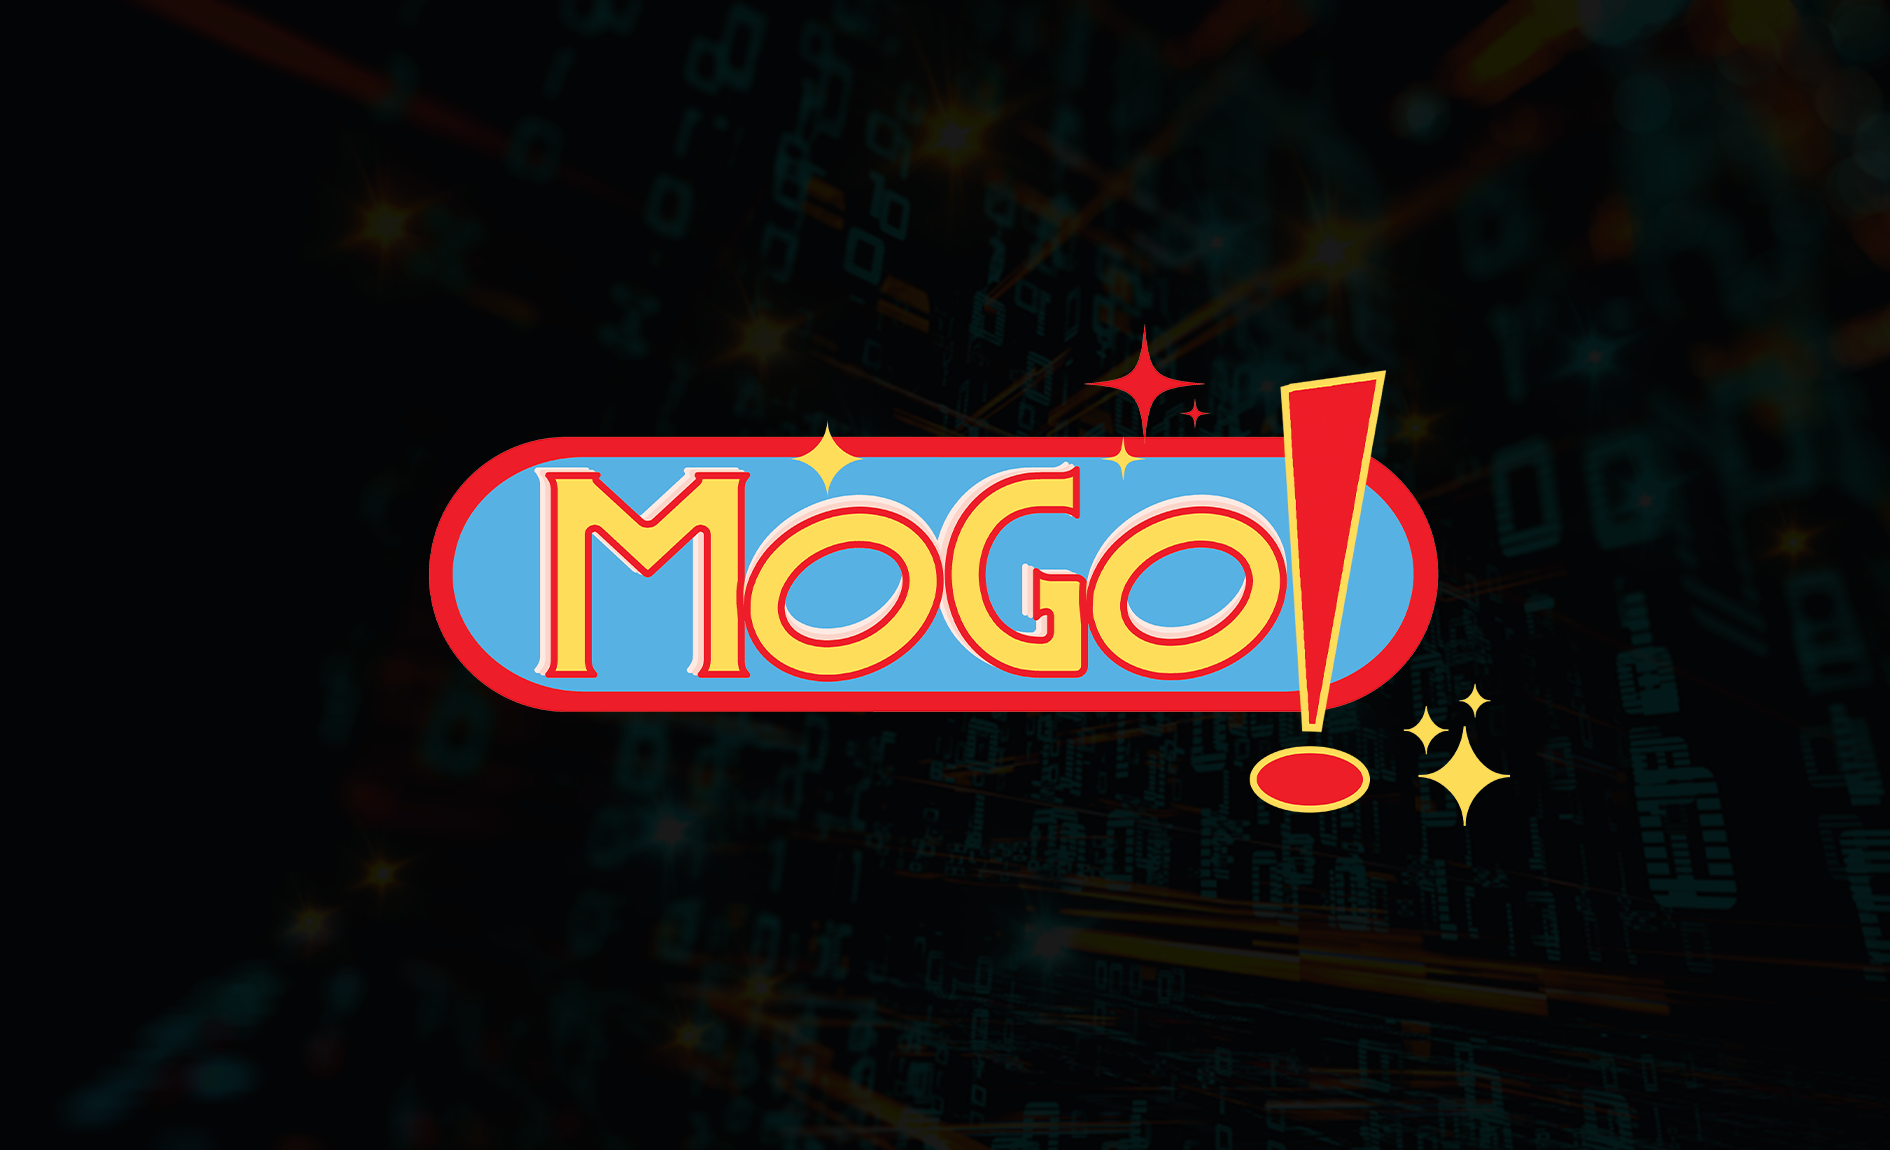 Former Riot executive Devin Murphy joins MOGO